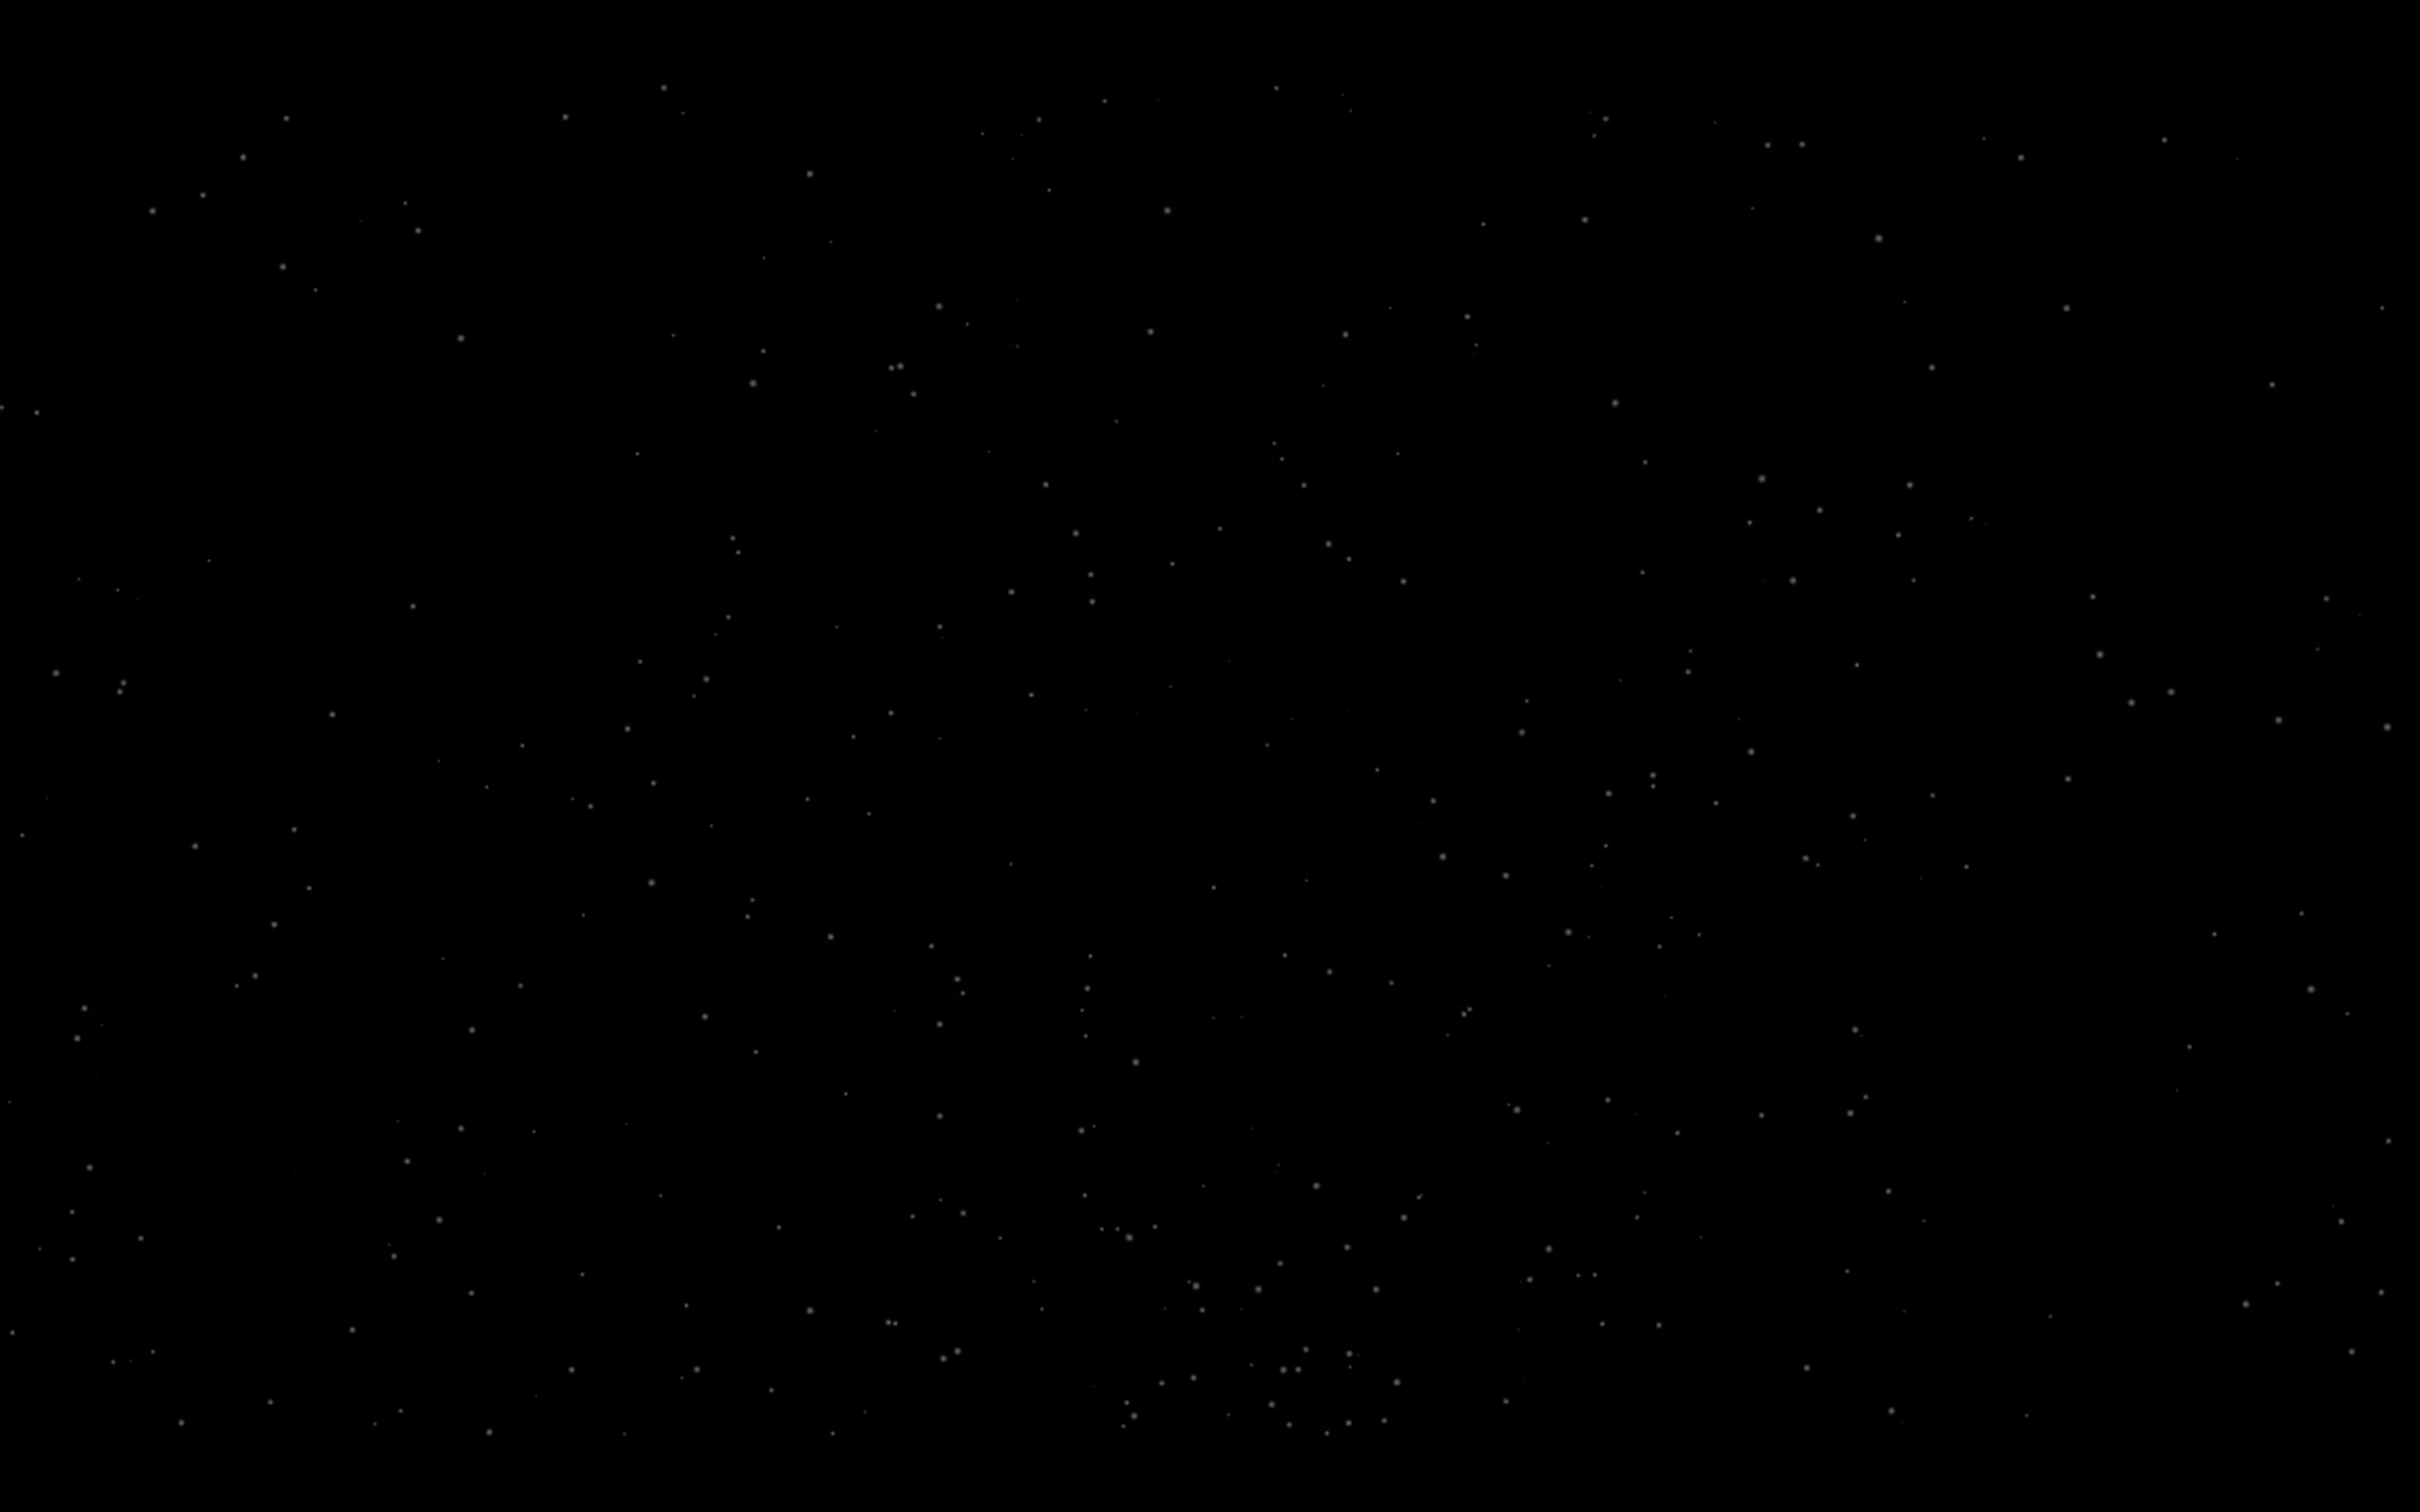 Recreating the Star Wars Opening Crawl With Trigonometry and CSS